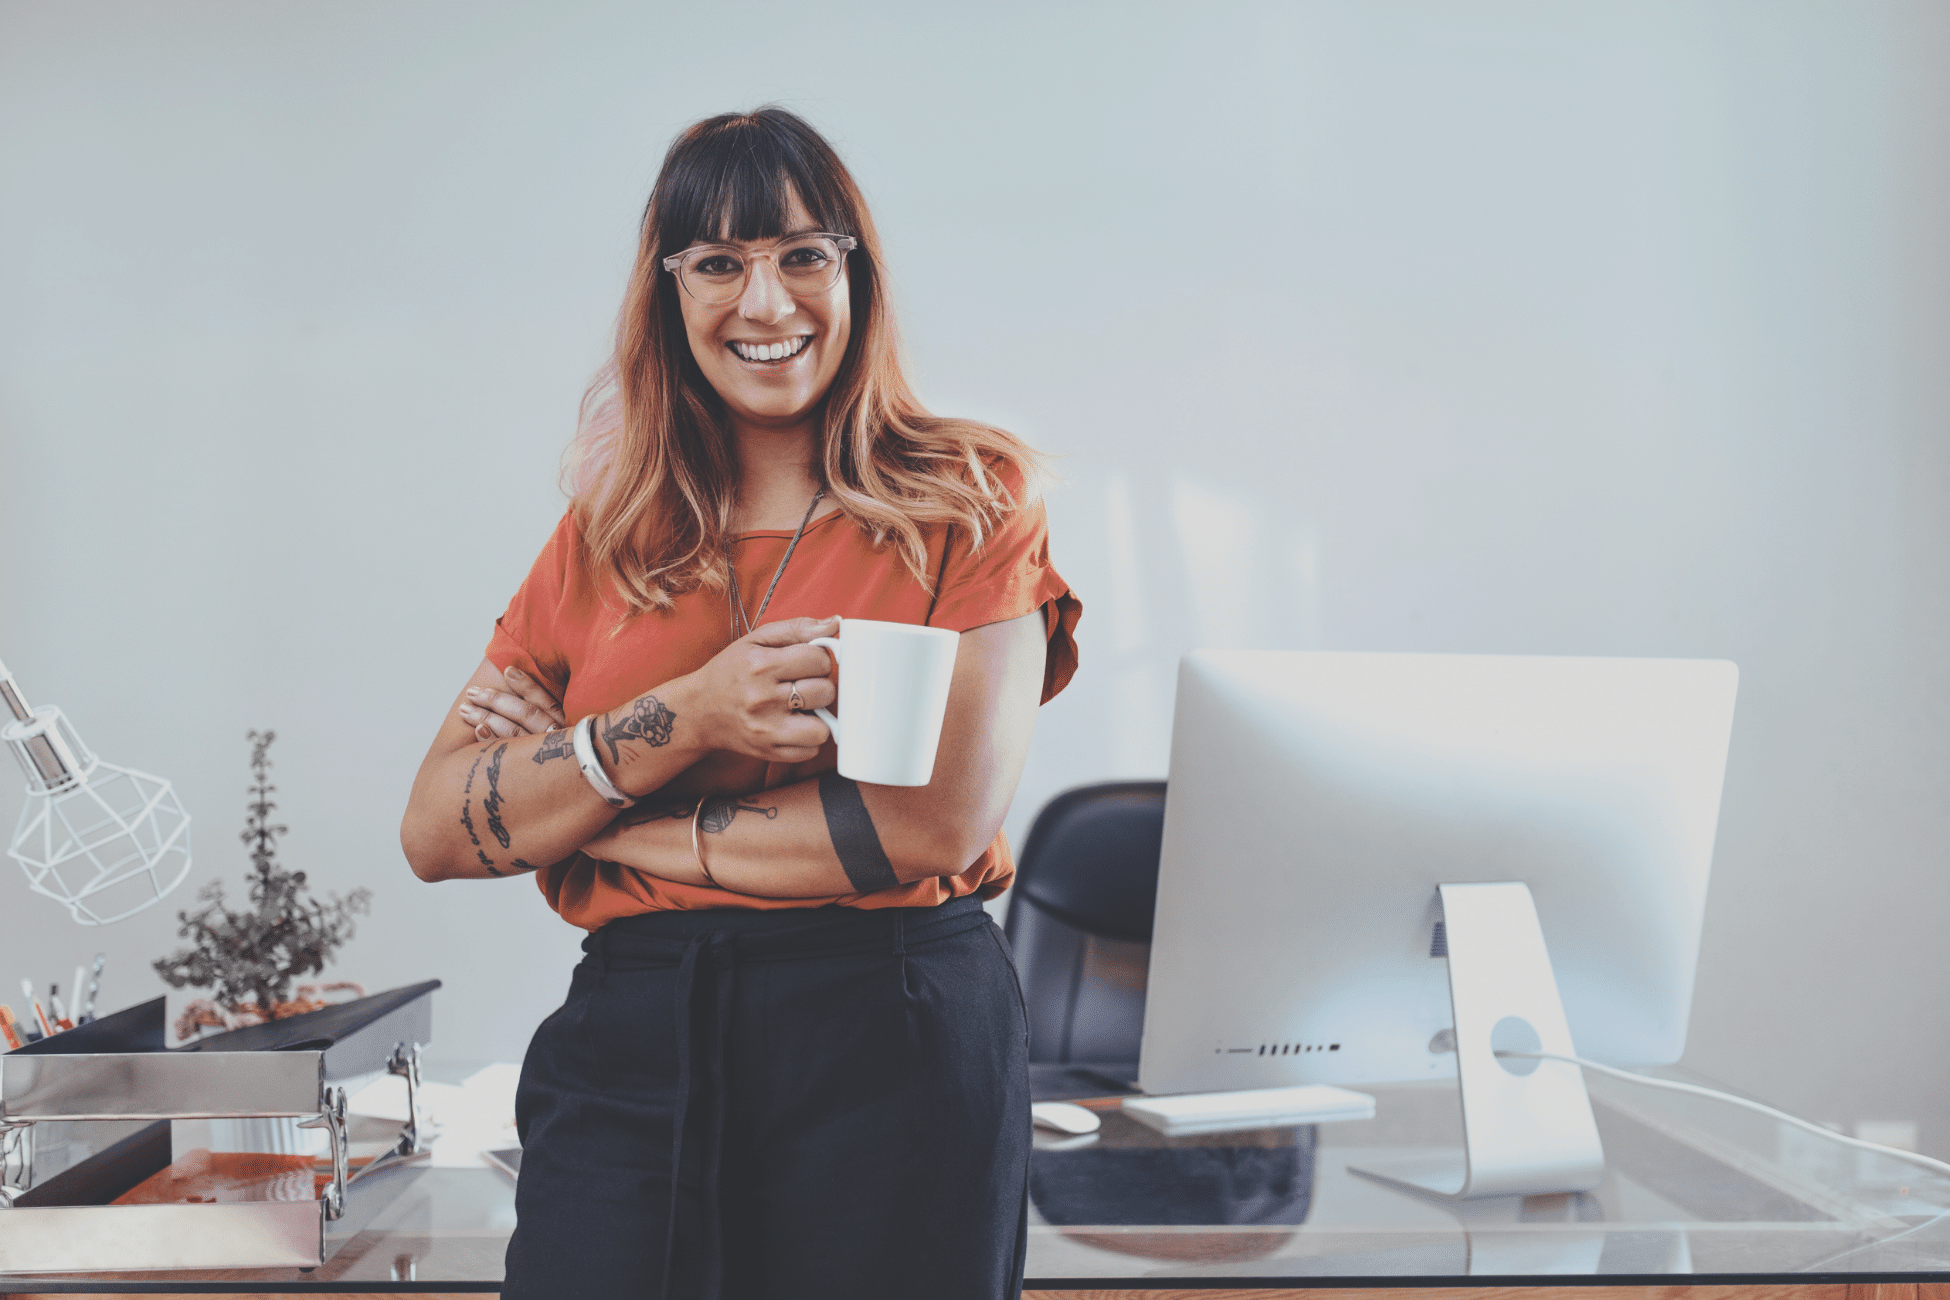 Meet global compliance requirements. Smiling woman holding a cup of coffee, leaning against her workdesk. » admin by request » admin by request